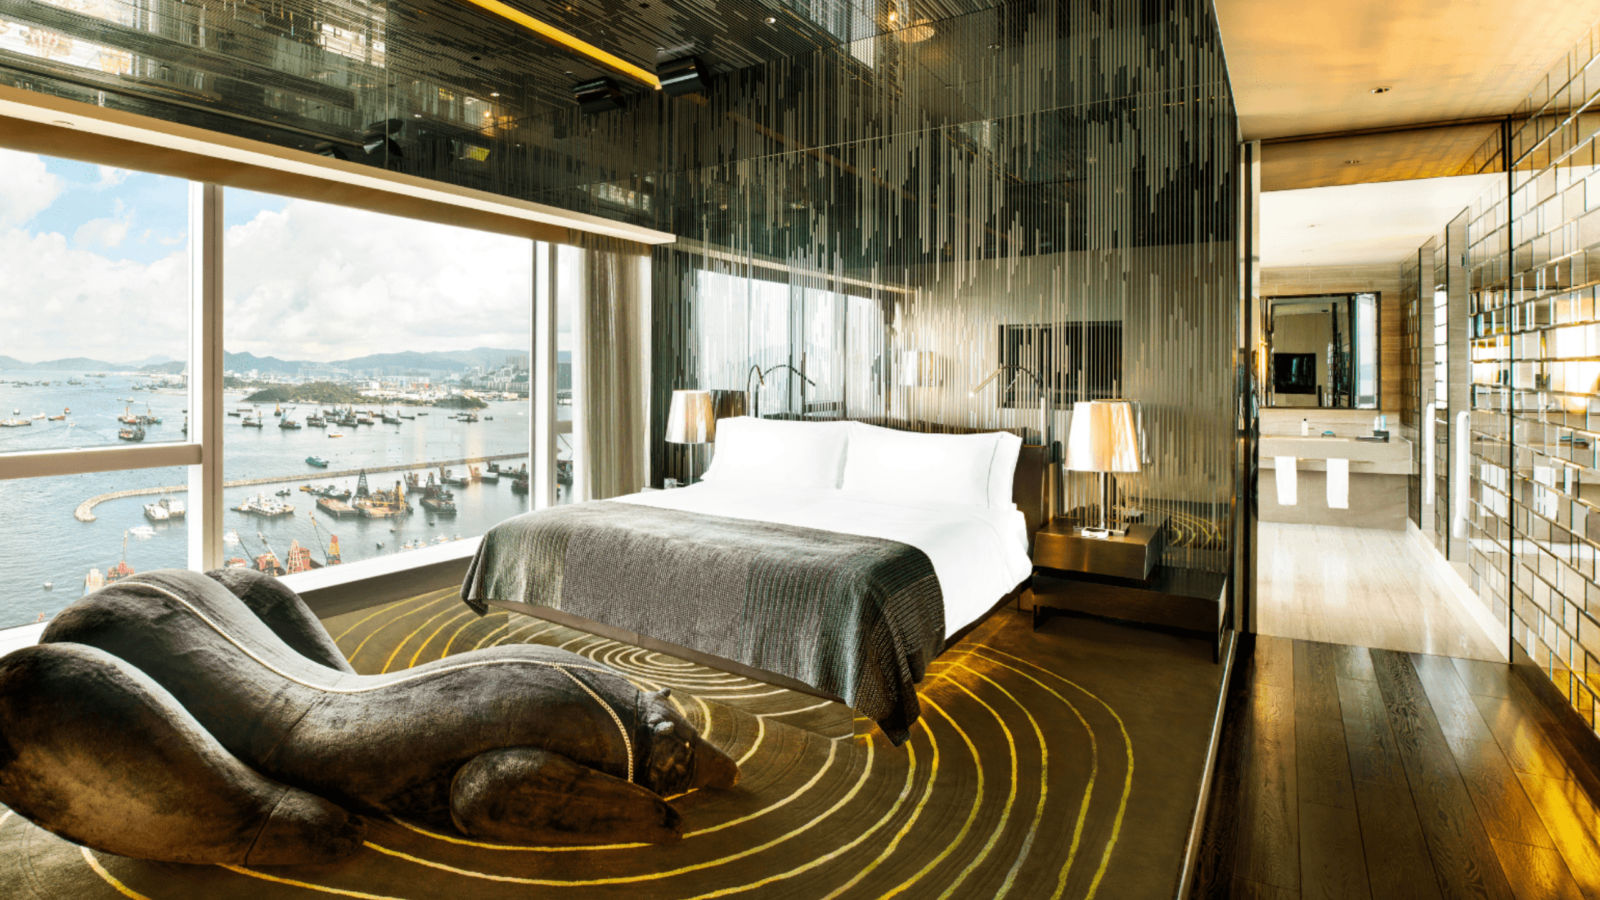 Hong Kong’s most extravagant hotel suites